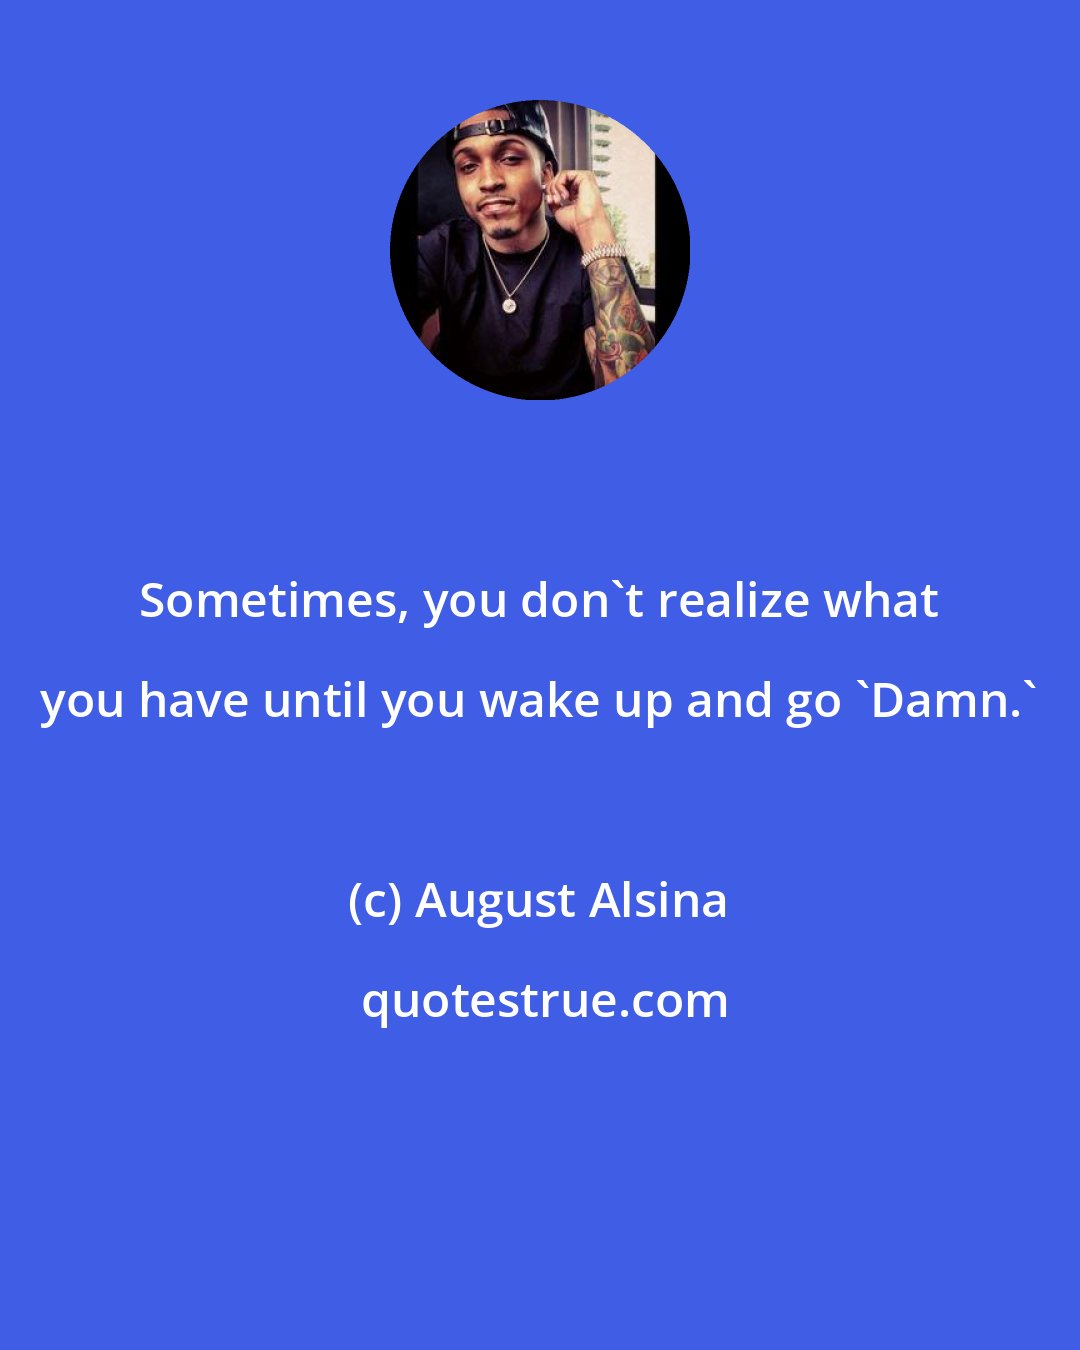 August Alsina: Sometimes, you don't realize what you have until you wake up and go 'Damn.'